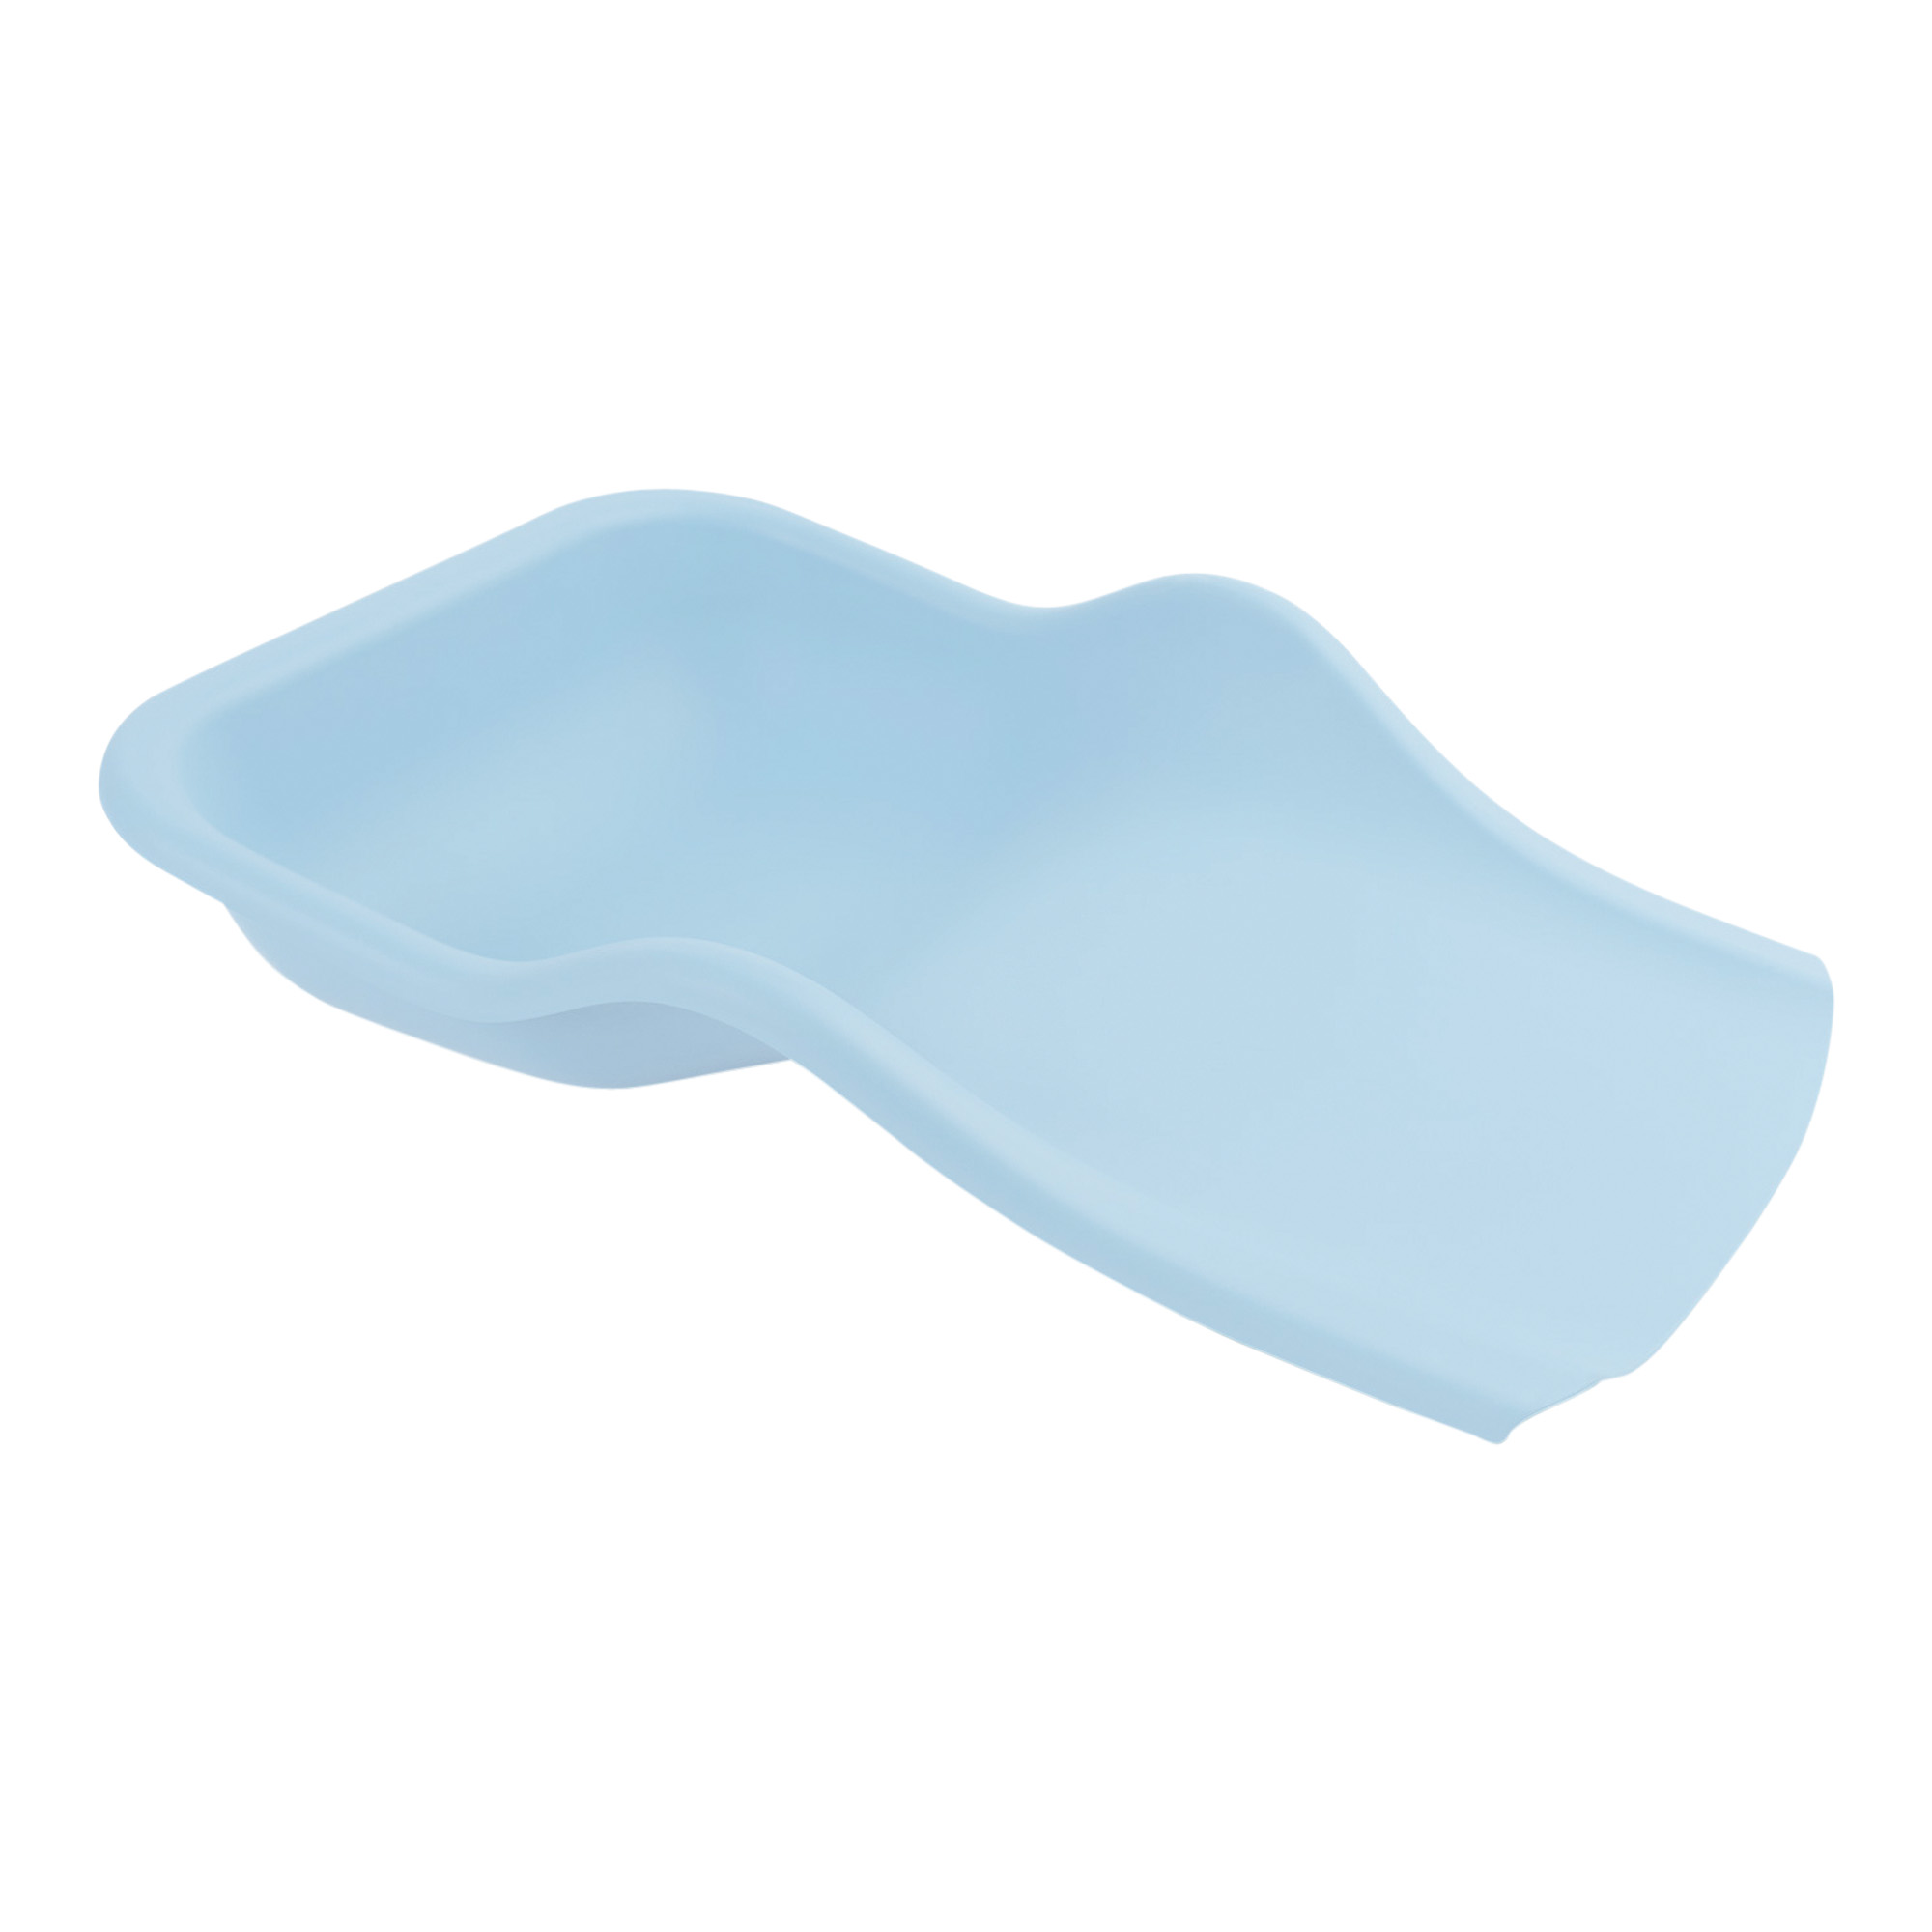 Flexible tray for the collection of pedicure residues on the foot light blue